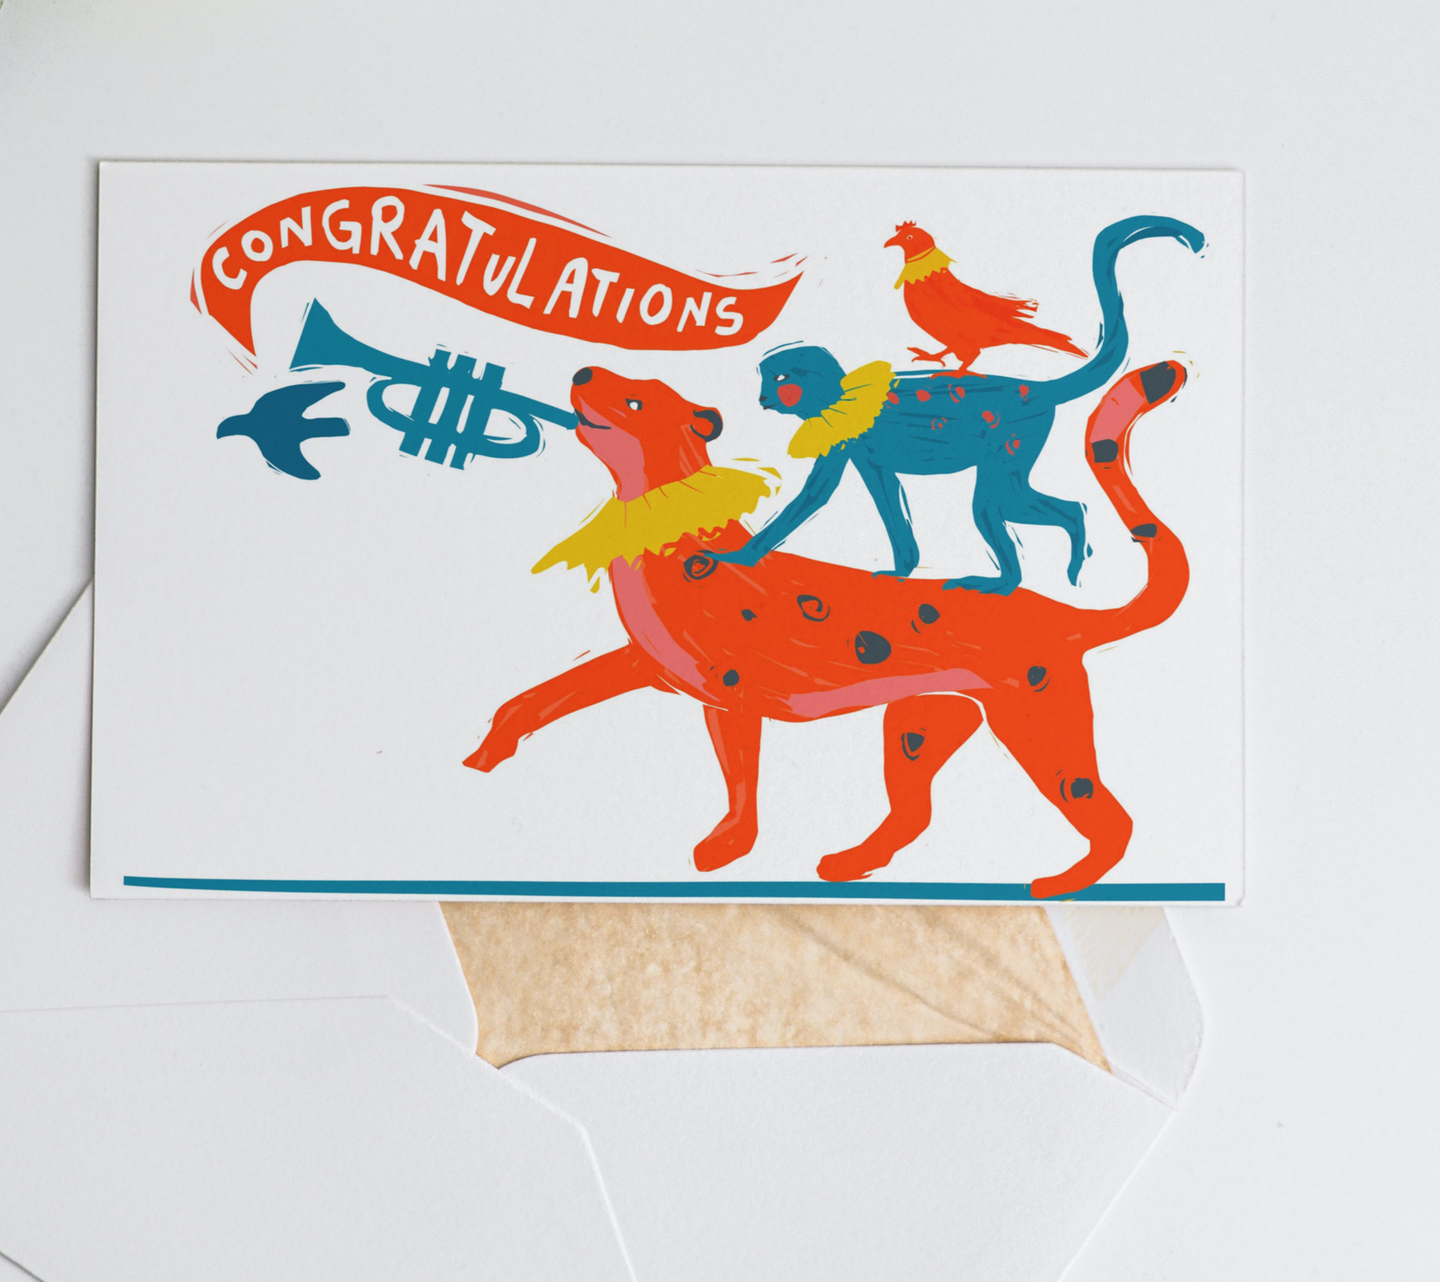 ANY OCCASION CARD -A PARADE OF ANIMALS CONGRATULATIONS GREETING CARD